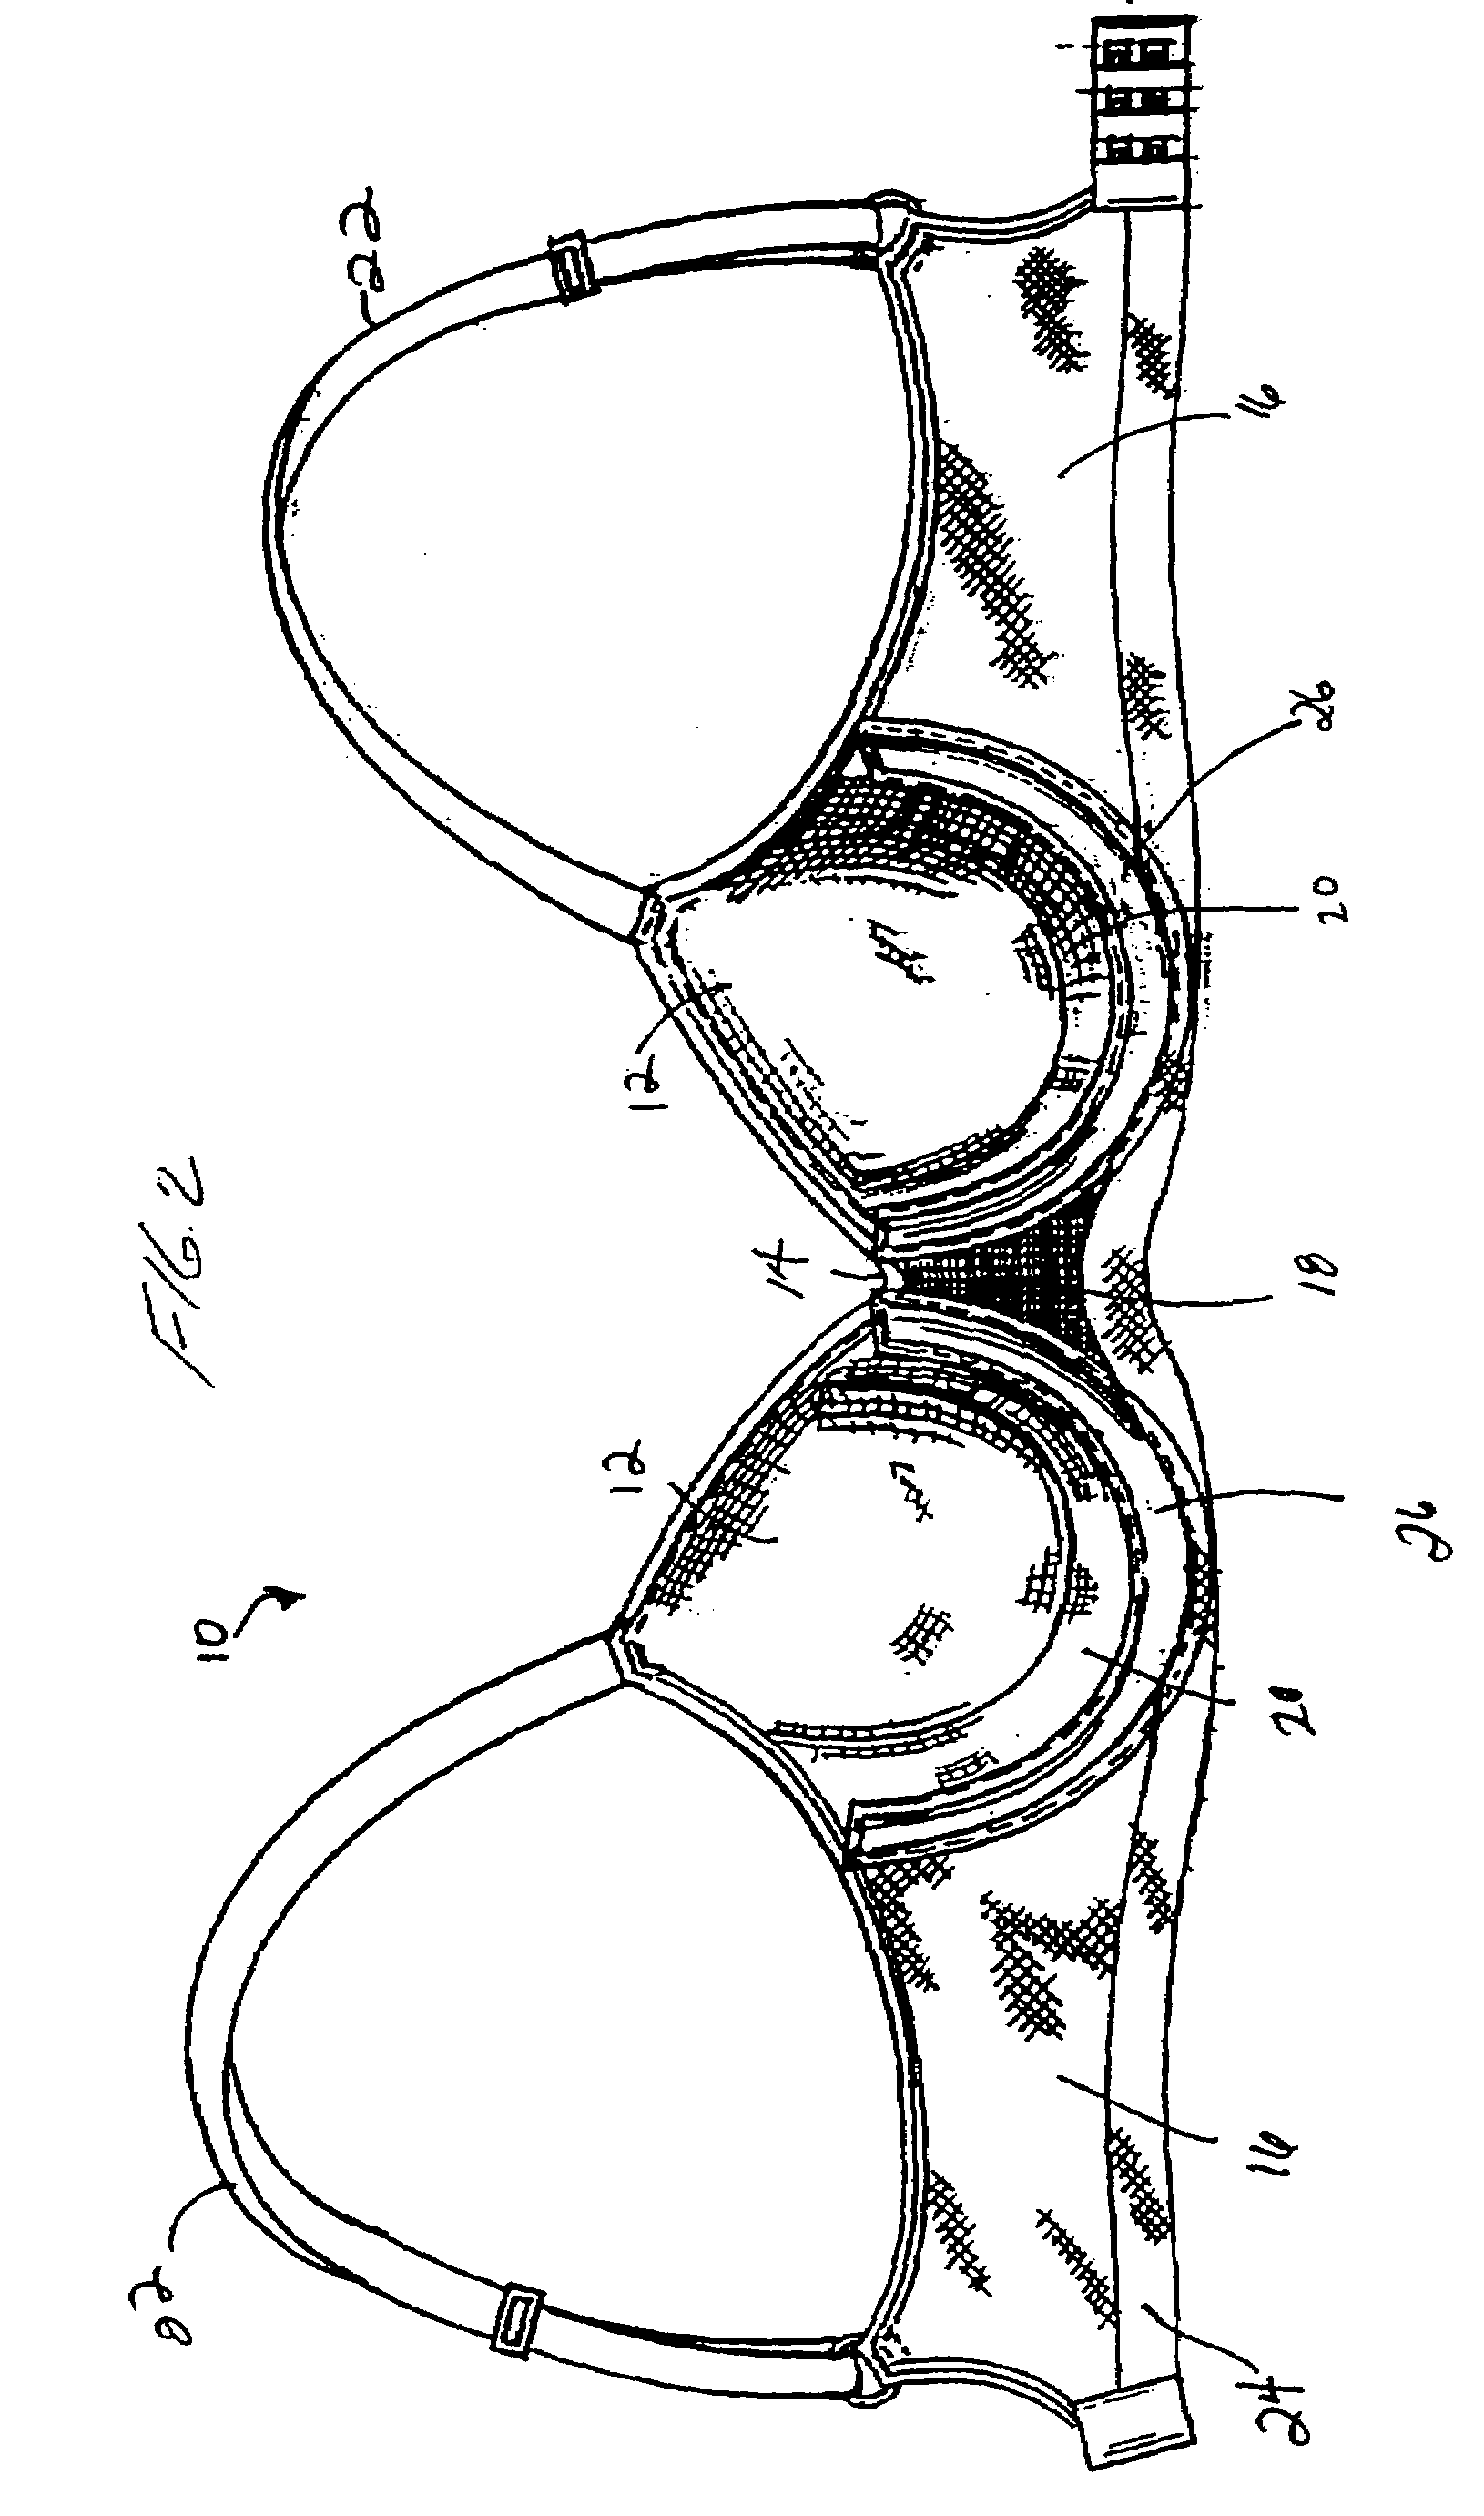 Adjustable circular knit bra with stabilizing areas and method of making the same